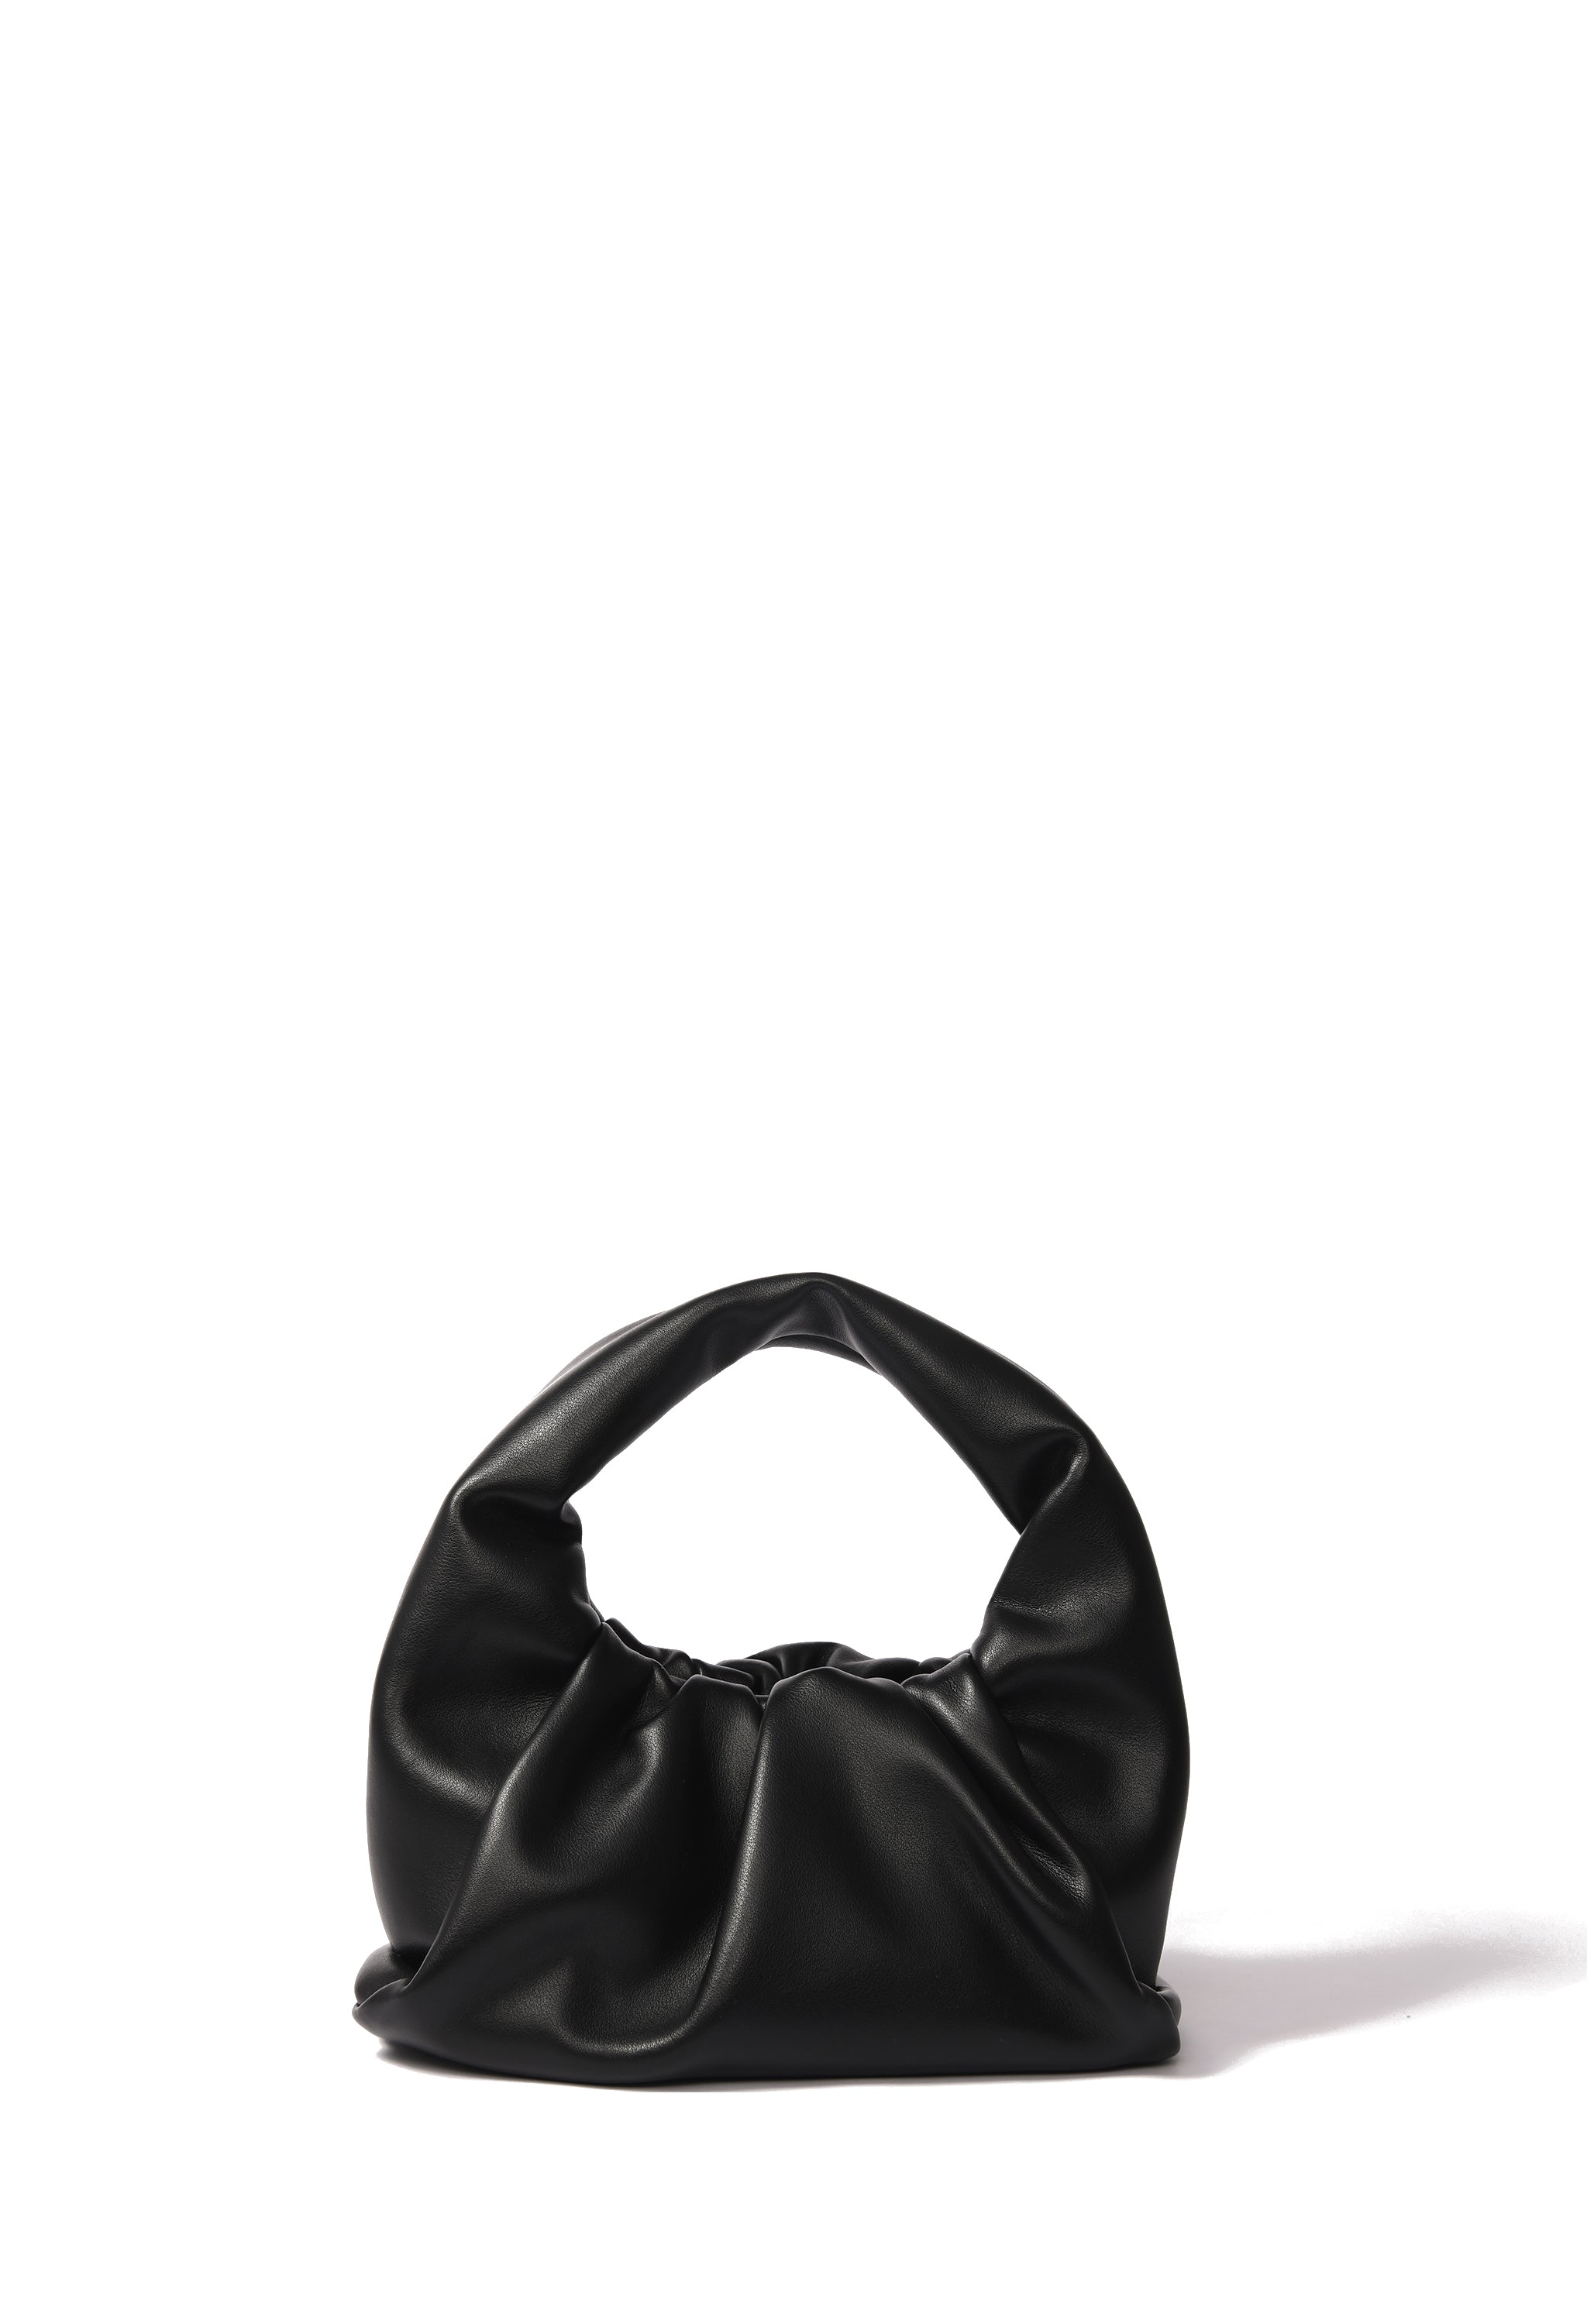 Marshmallow croissant bag in soft leather, Black